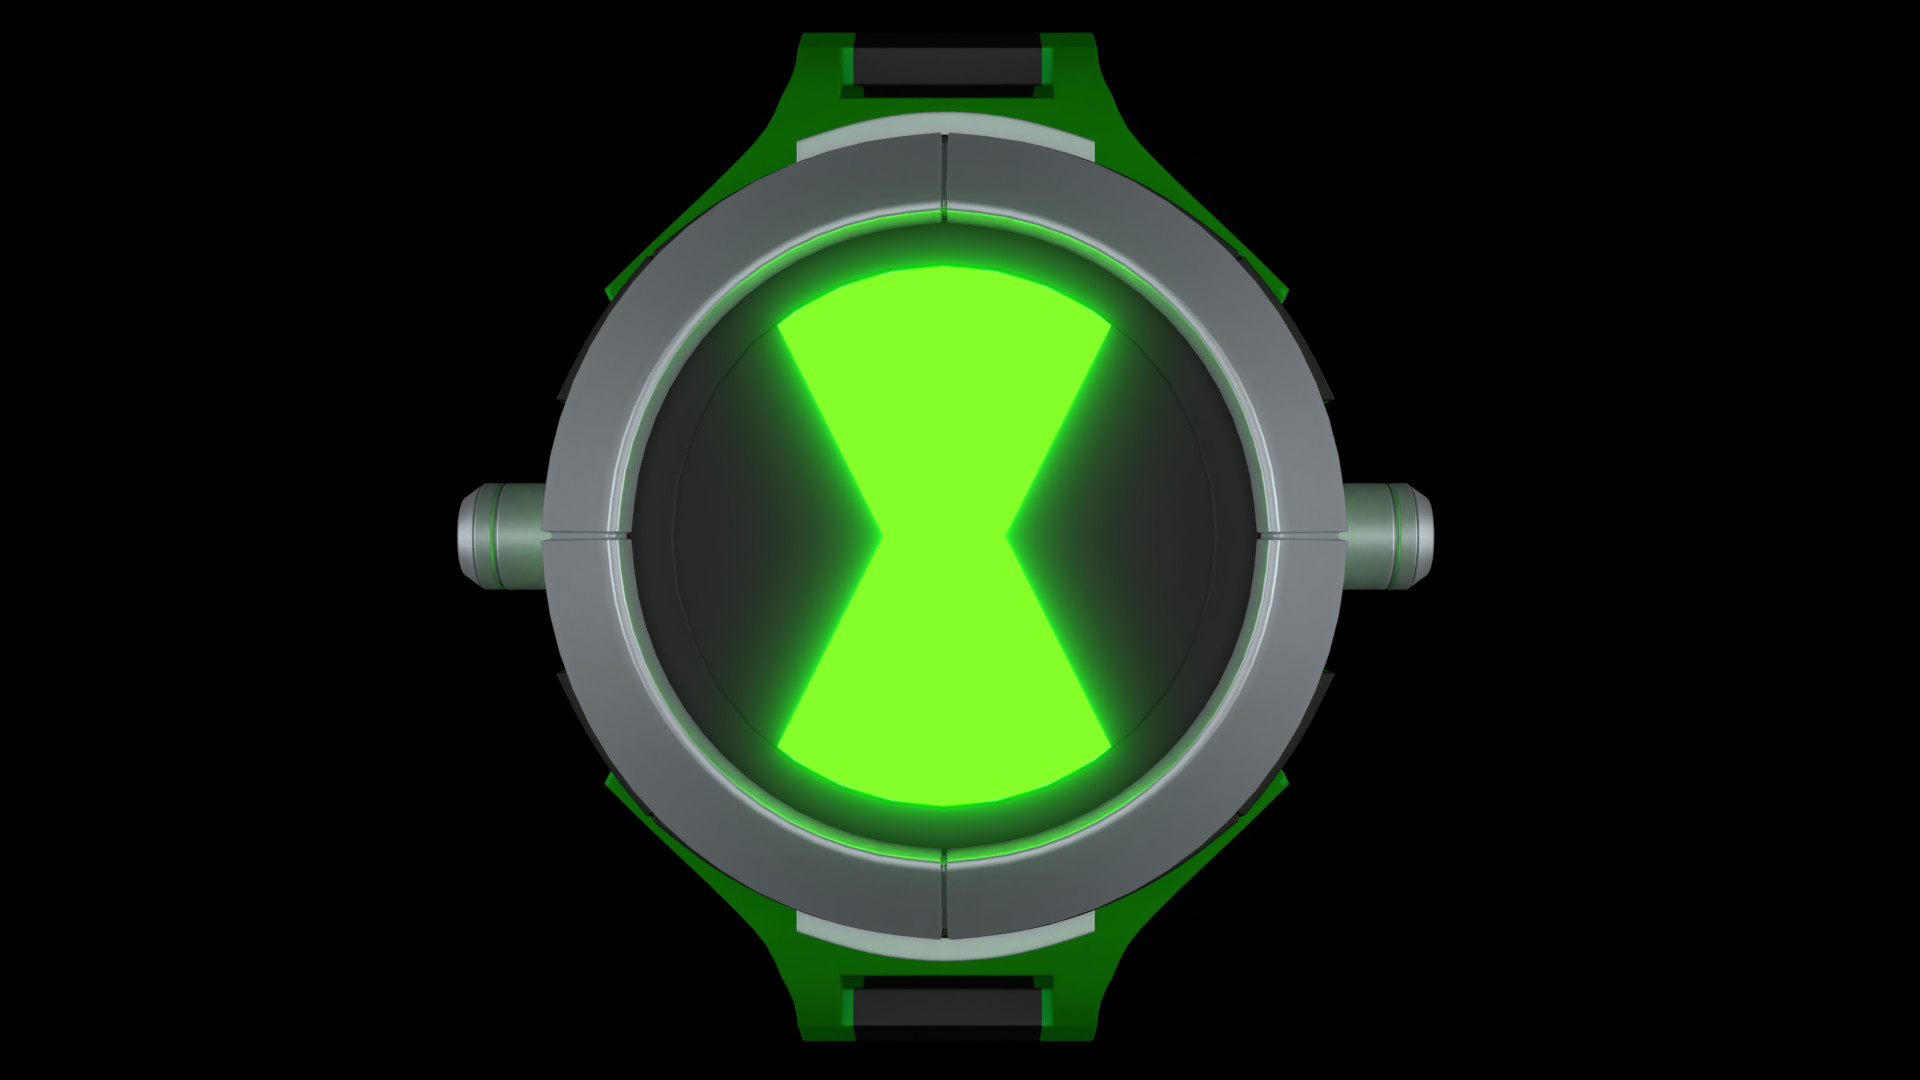 A simple but detailed model of the Omnitrix from Ben 10 alien force. 